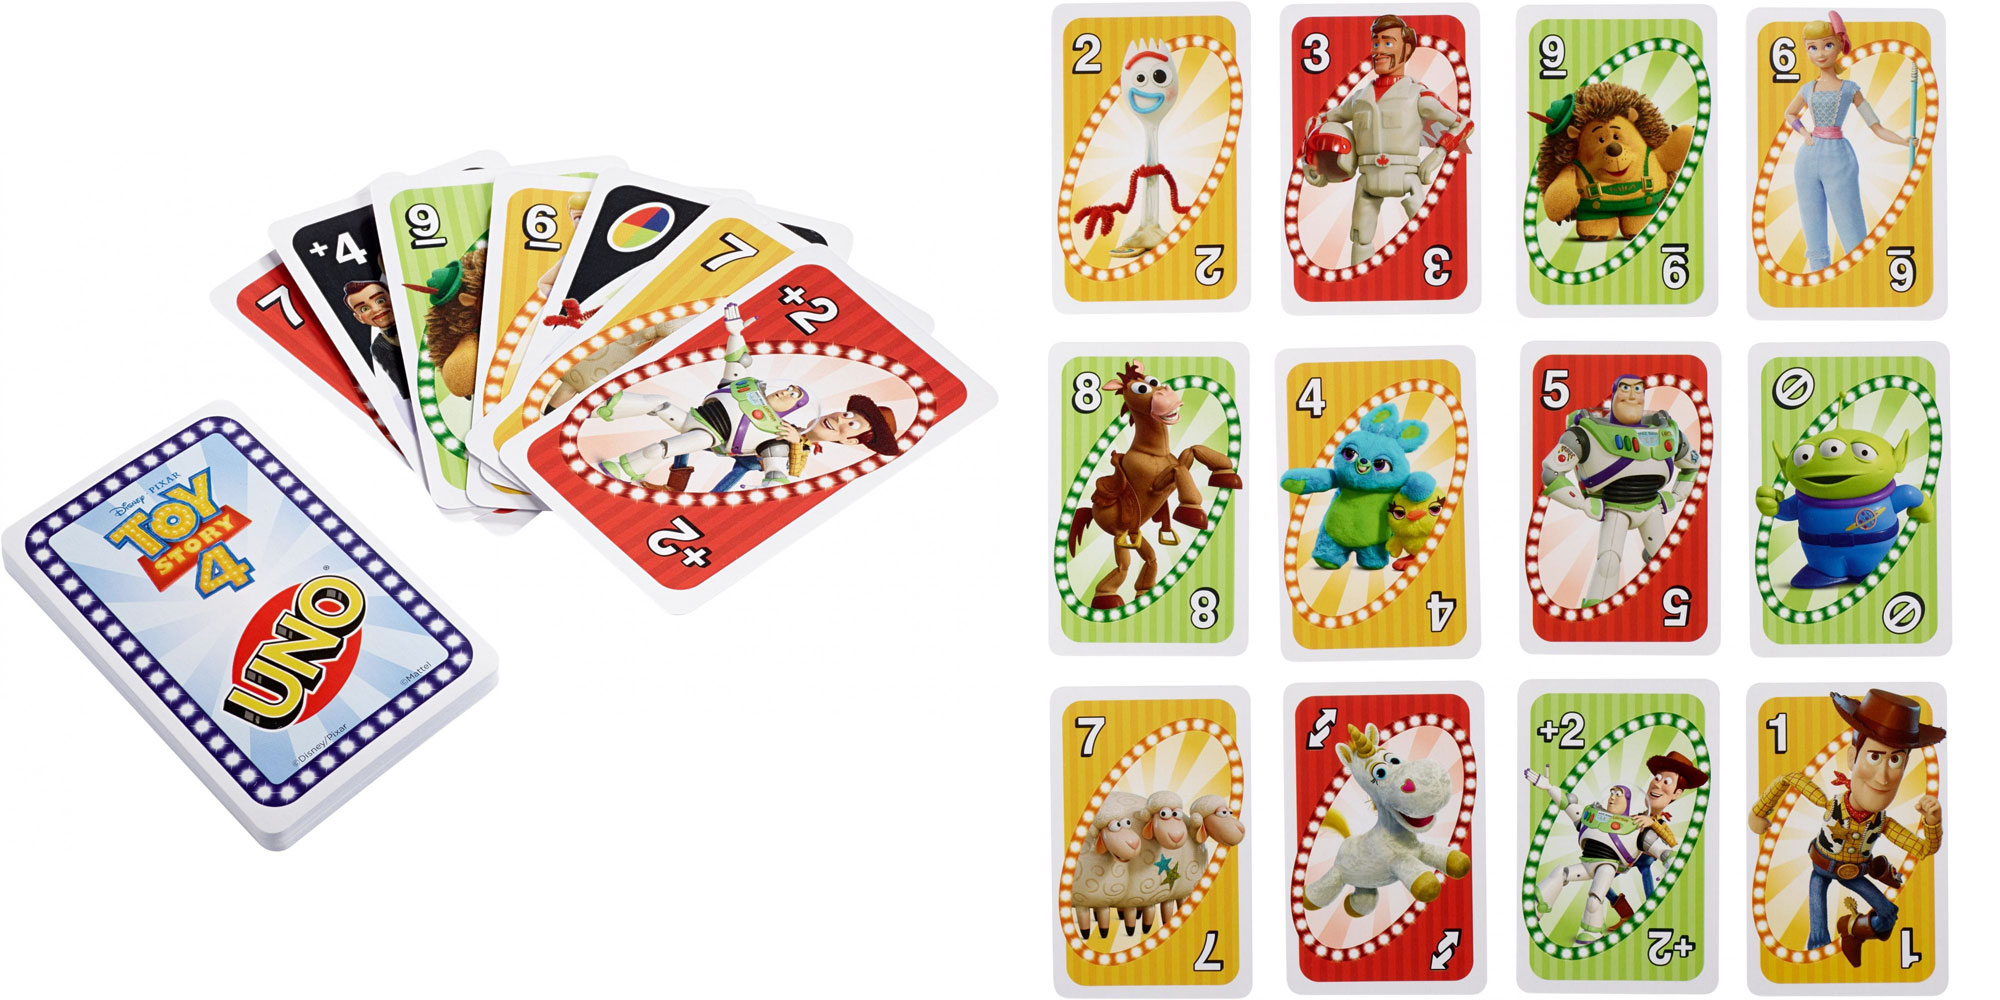 Take 33 off Amazon's 1 bestselling Toy Story 4 UNO card game, now